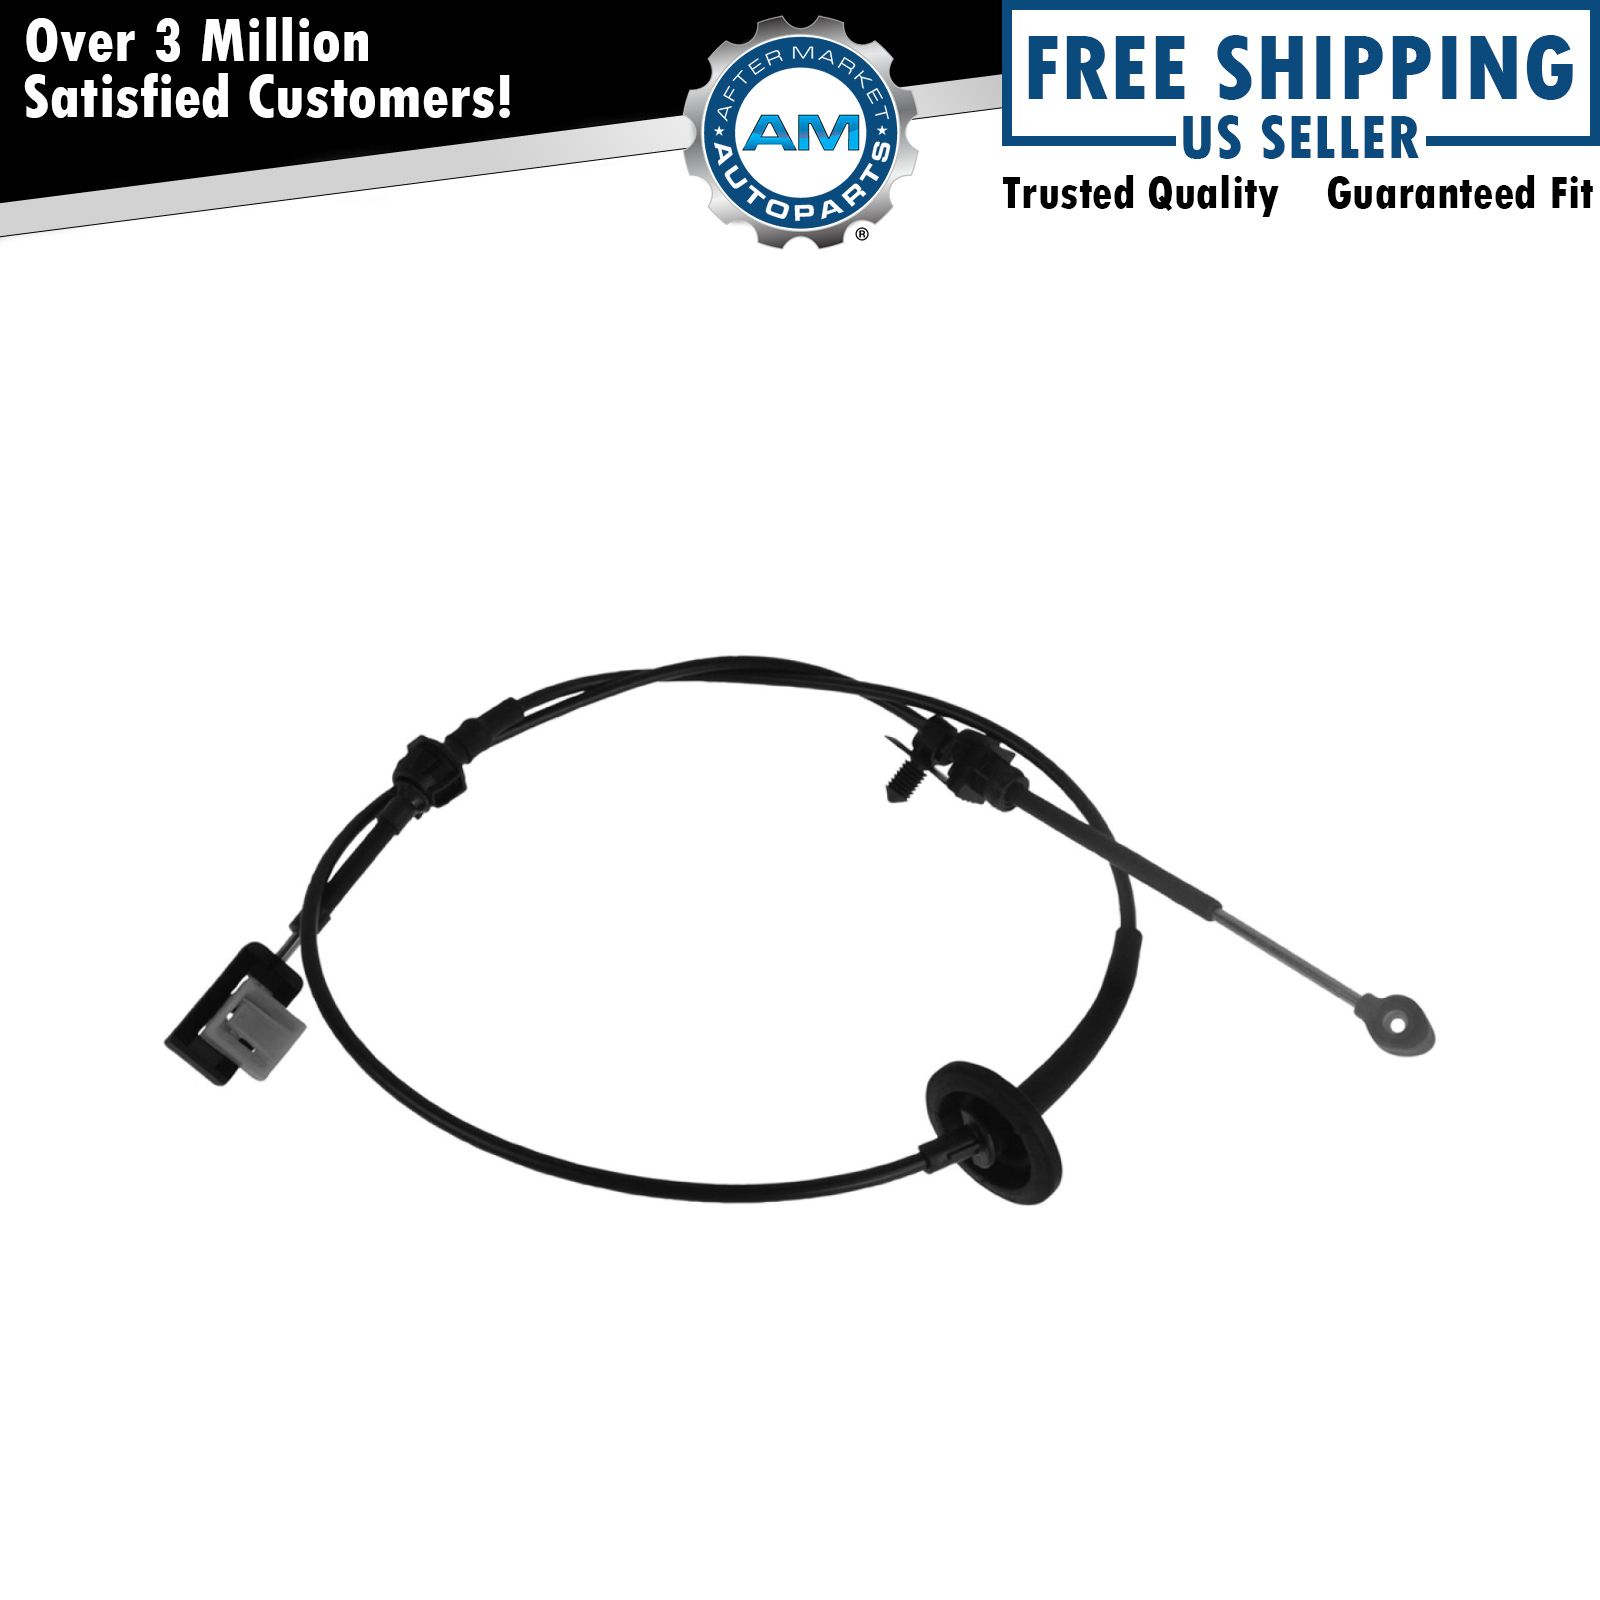 OEM XC3Z-7E395-CA Automatic Transmission Shift Cable for Ford Super Duty 7.3L